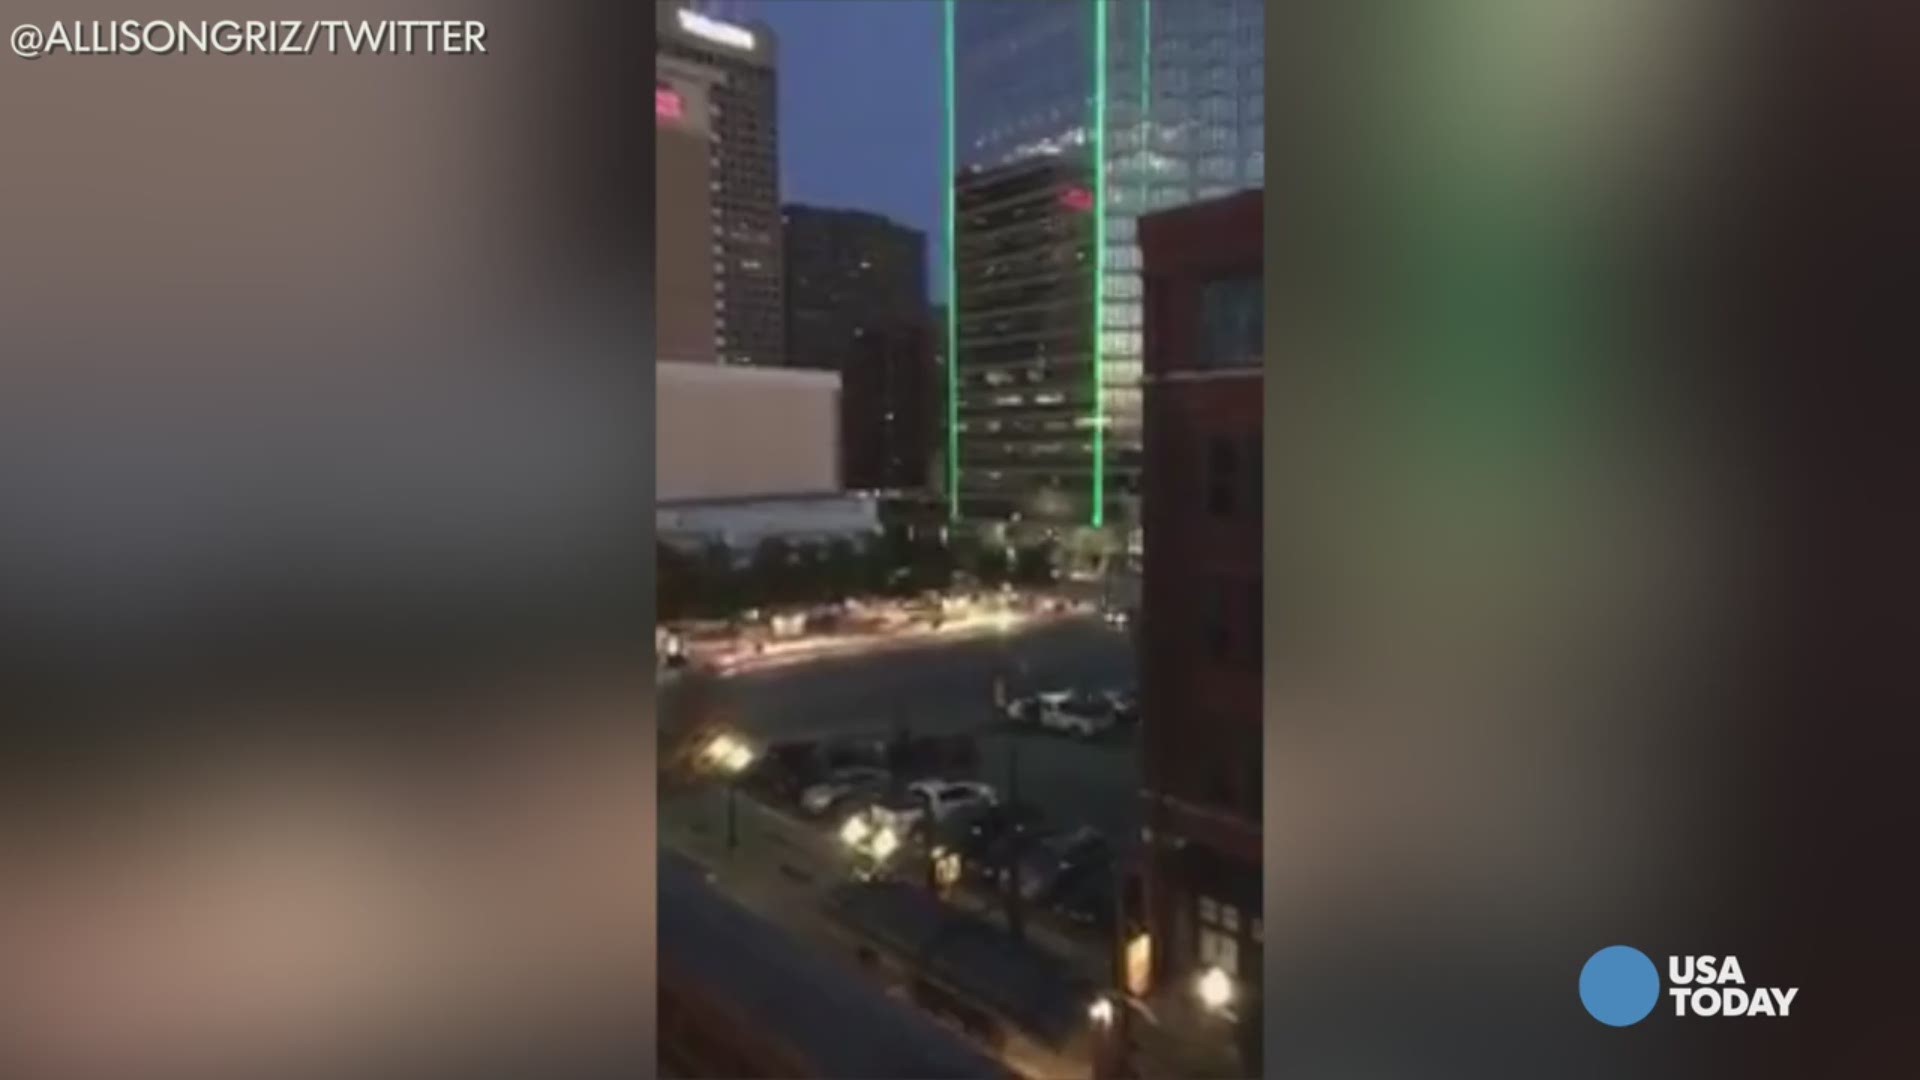 A video posted on Twitter from @AllisonGriz captures the suspected shooters in Dallas.